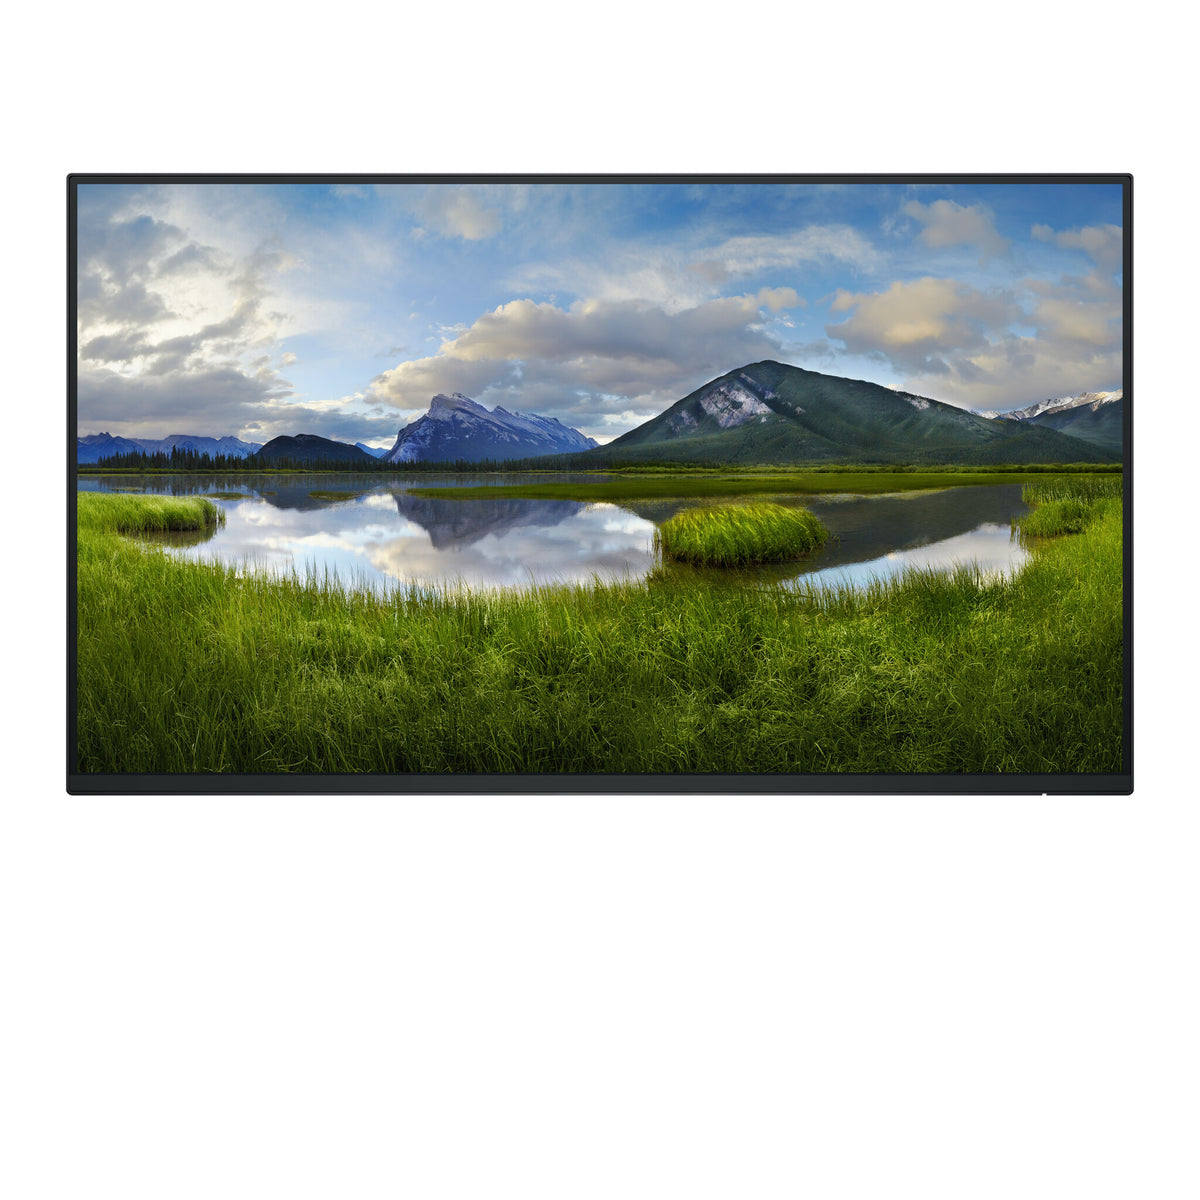 DELL P Series P2425H_WOST - 61 cm (24&quot;) - 1920 x 1080 pixels Full HD LCD Monitor (No Stand)